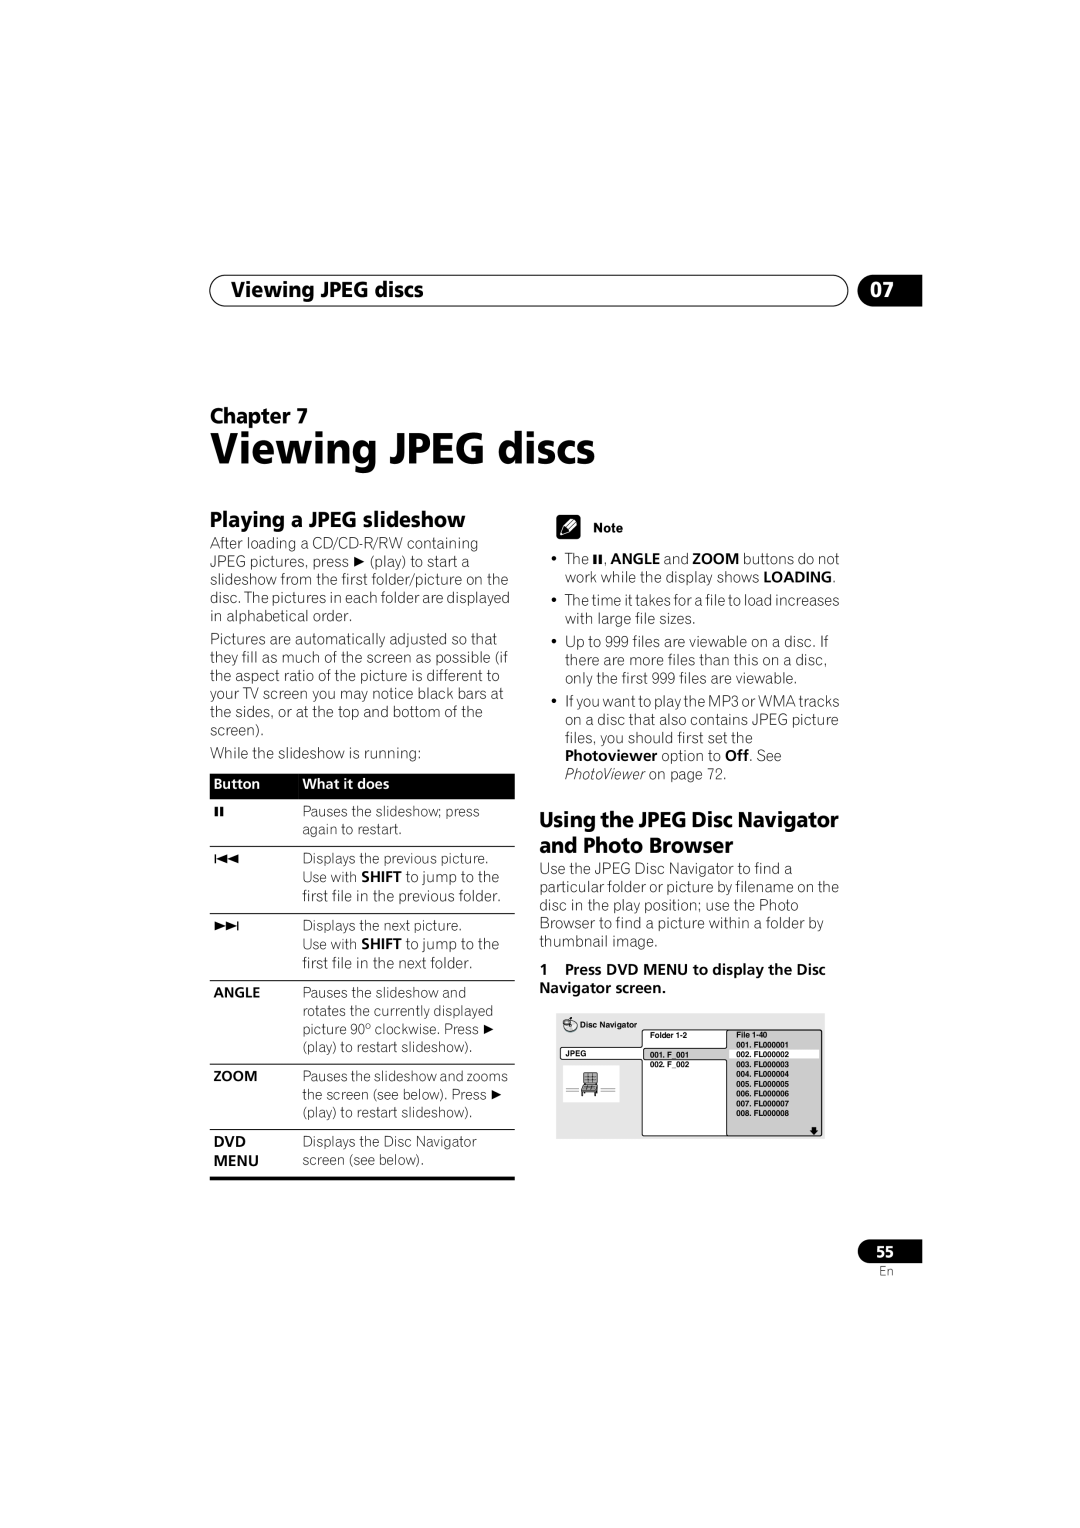 Pioneer S-HTD330 Viewing JPEG discs, Playing a JPEG slideshow, Chapter, Using the JPEG Disc Navigator and Photo Browser 